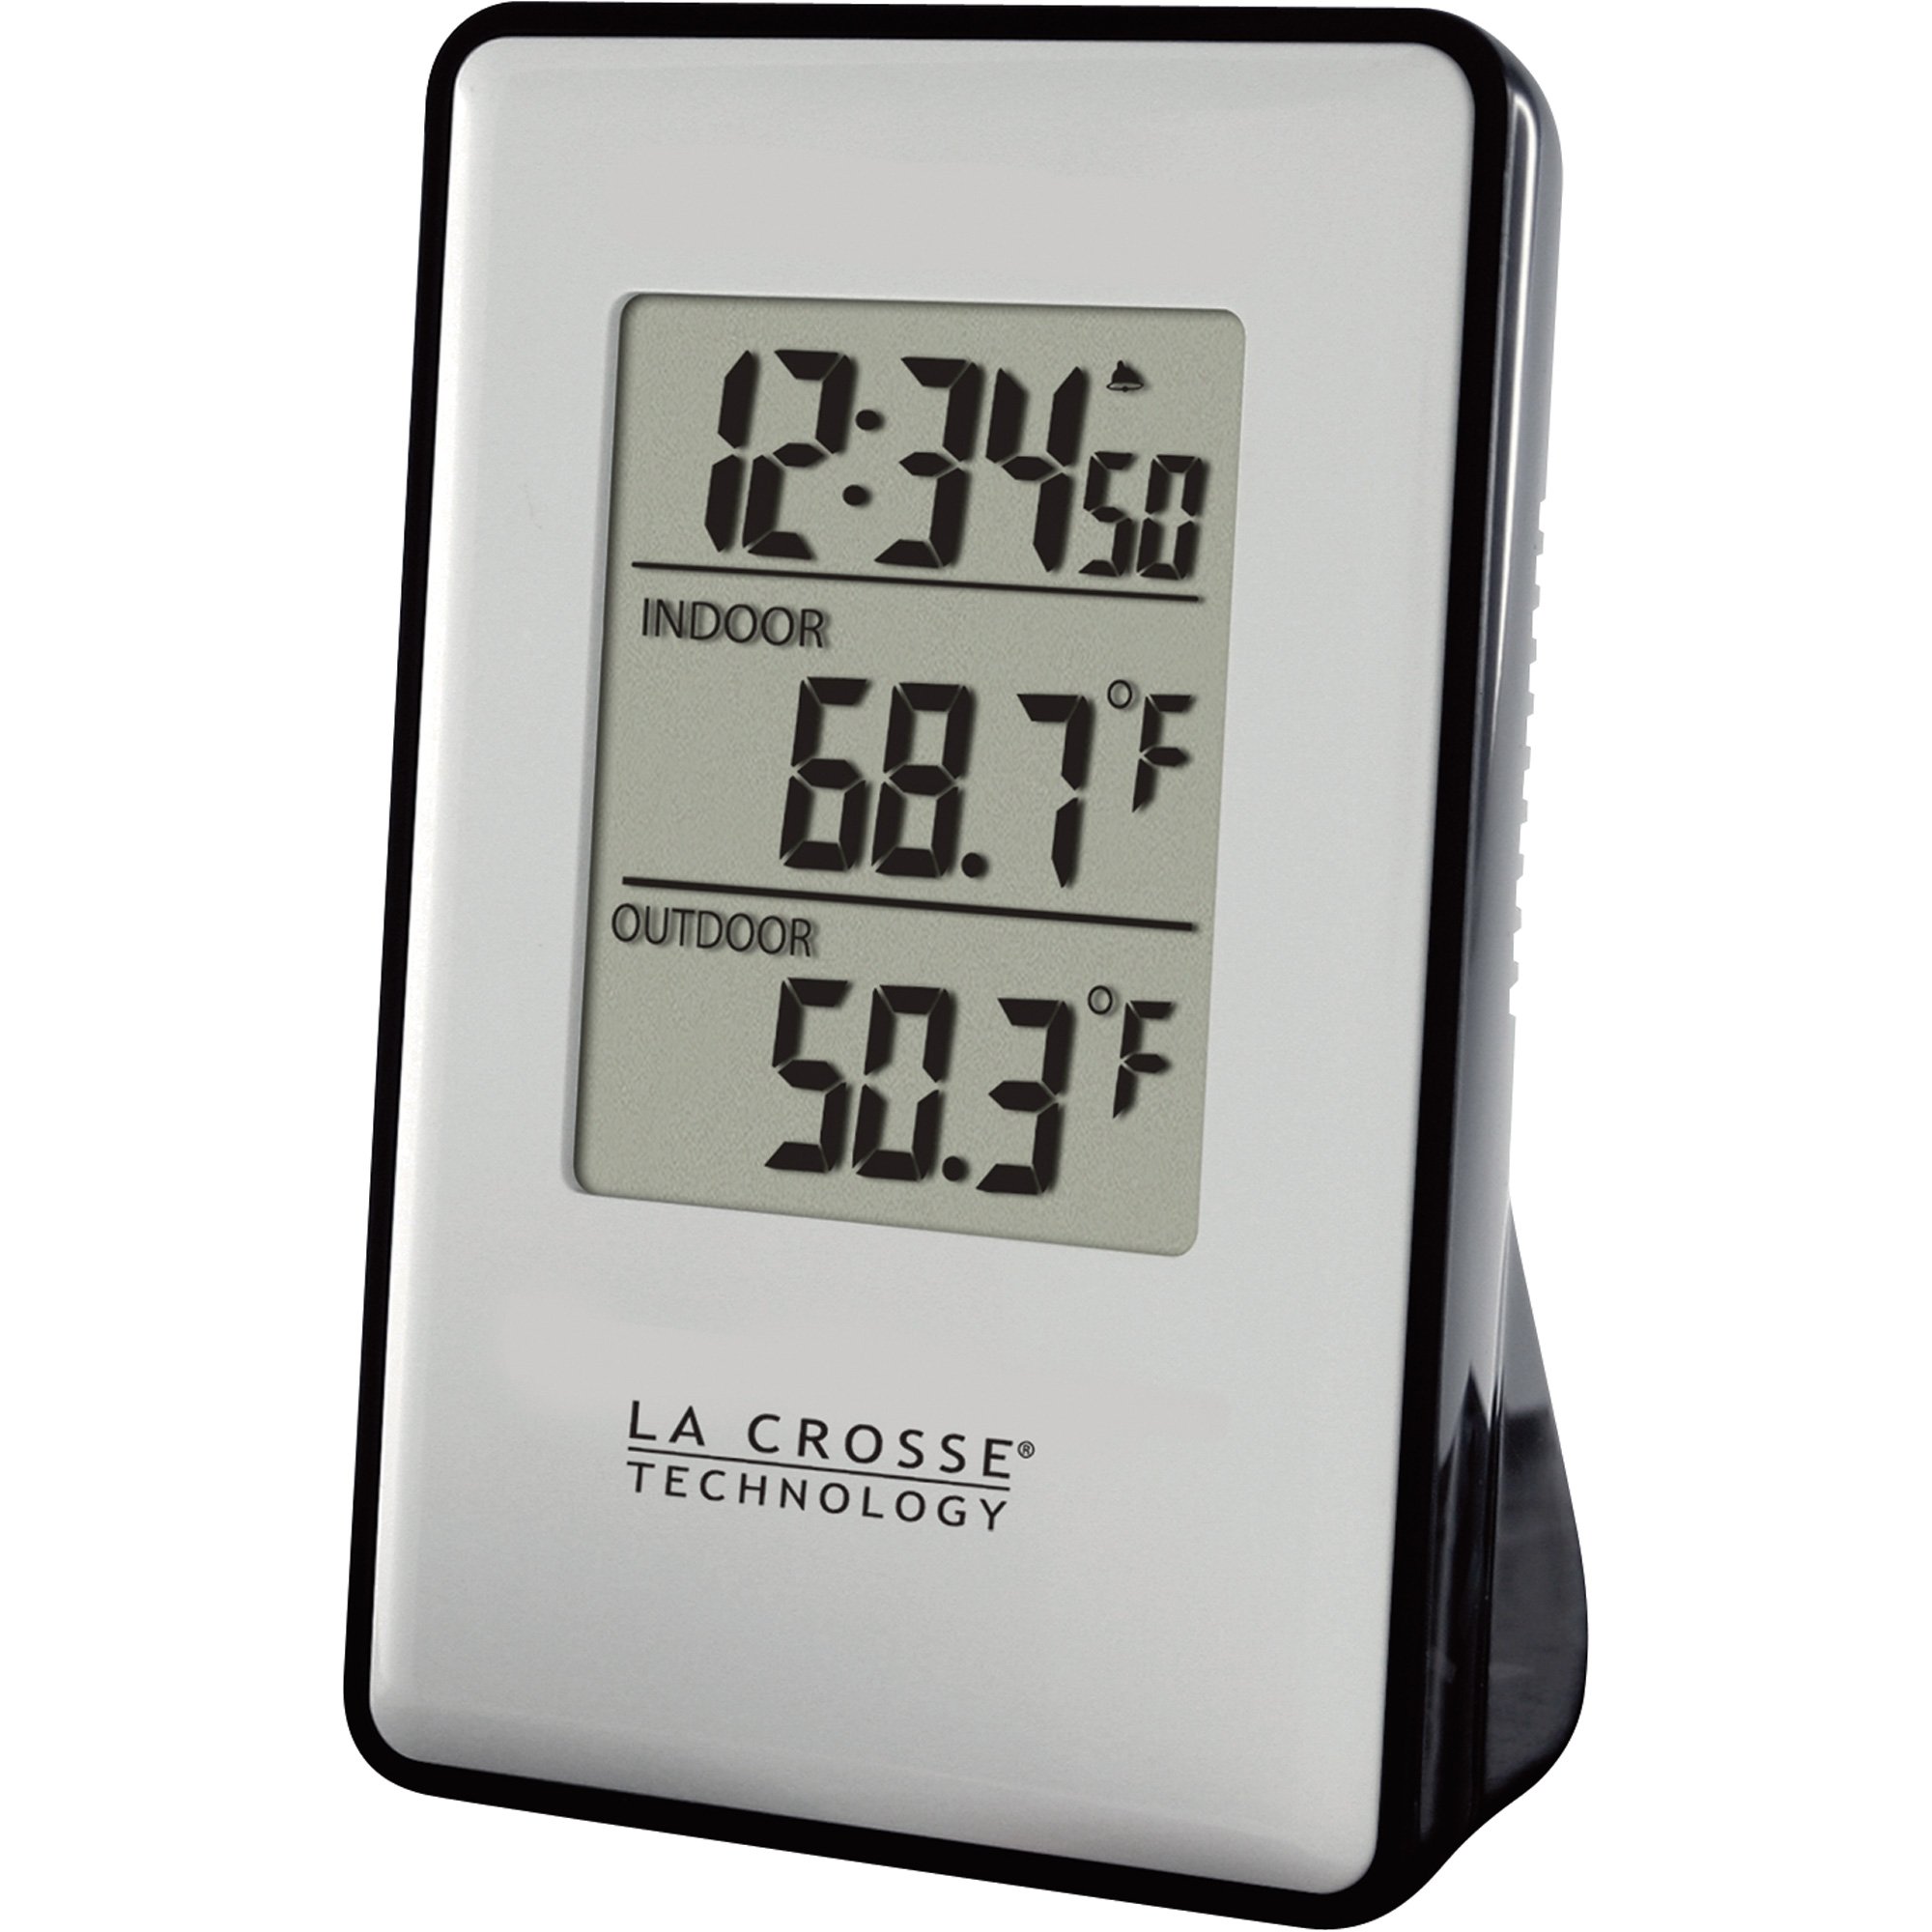 LaCrosse Technology Wireless Thermometer Station — Digital Display, Model#  308-1910